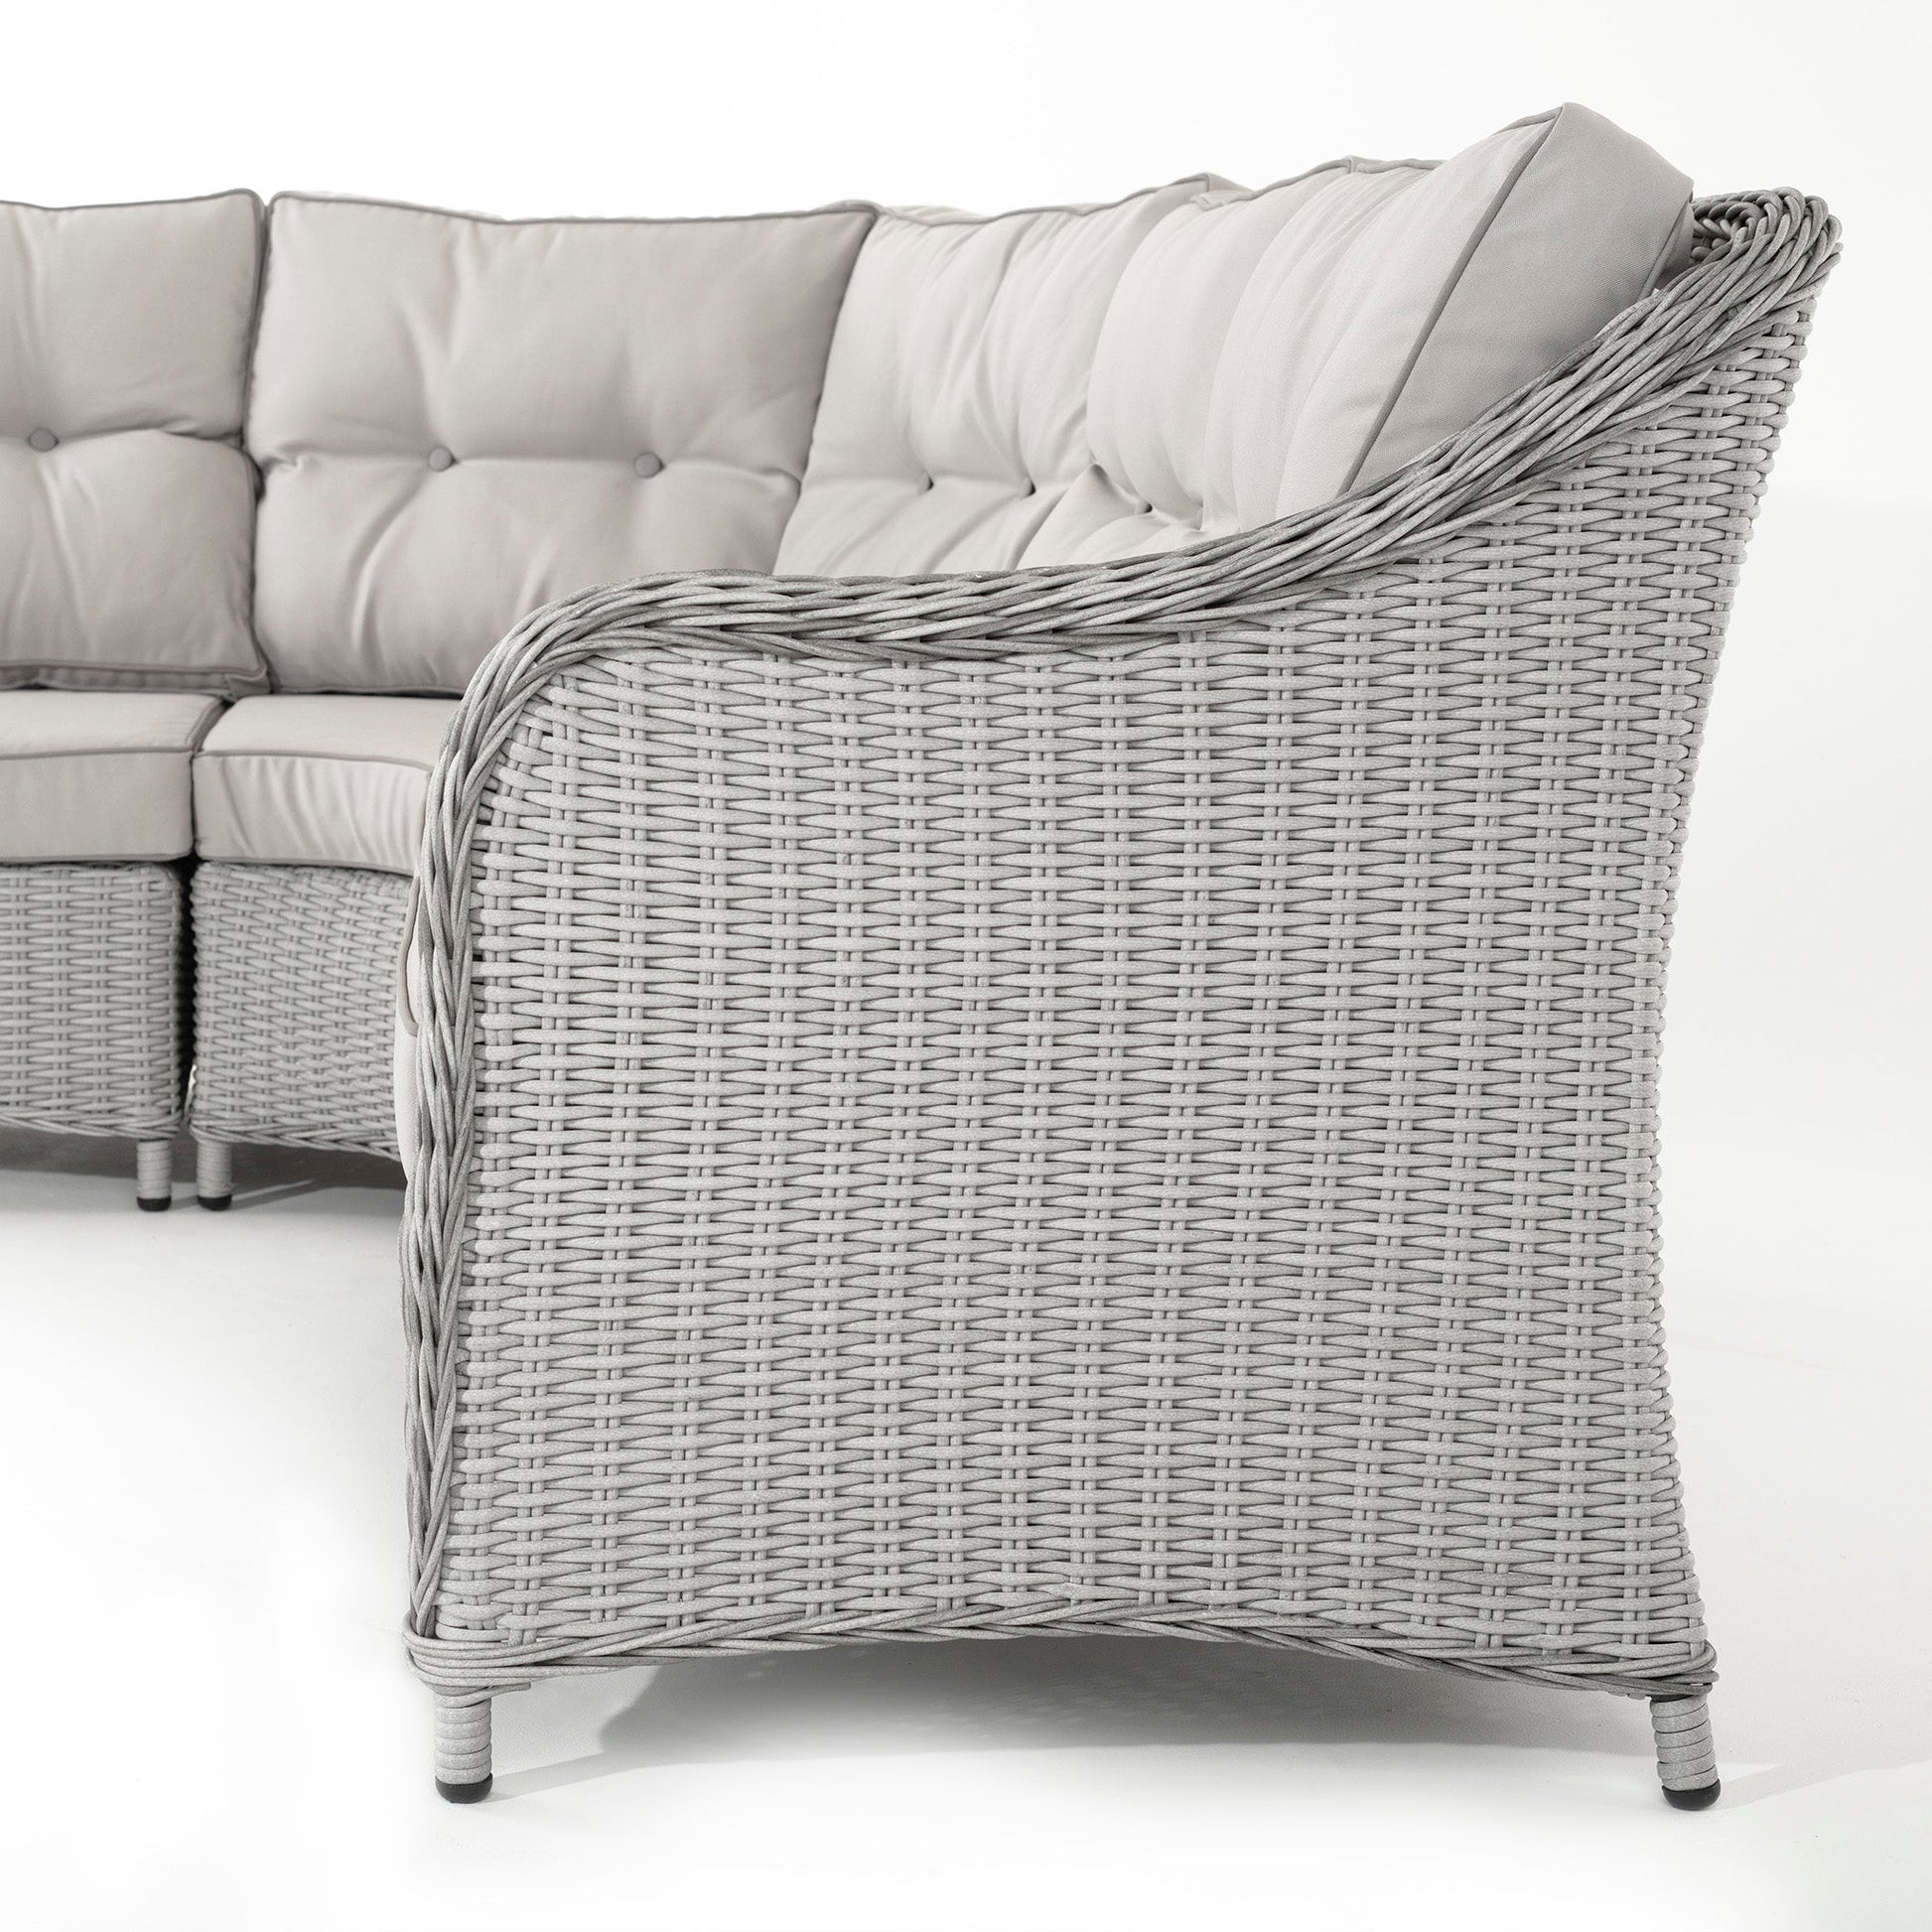 Hazz Corner Sofa with Rising Table and 2 Benches in Grey Rattan - Italiancityfurniture